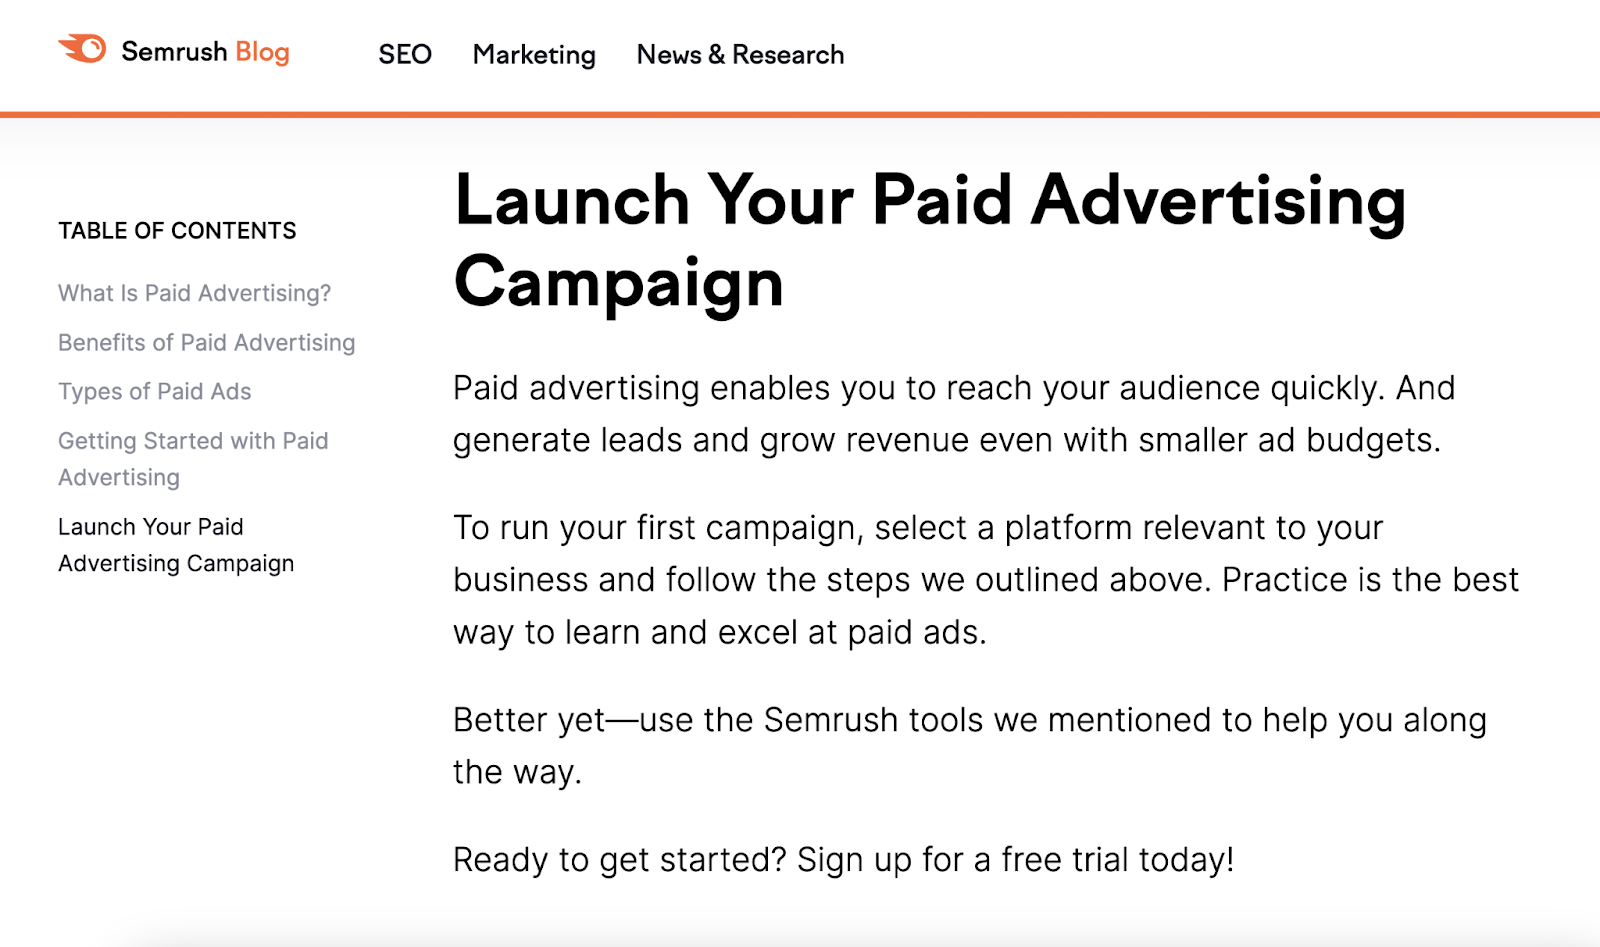 A conclusion of Semrush's guide to paid advertising